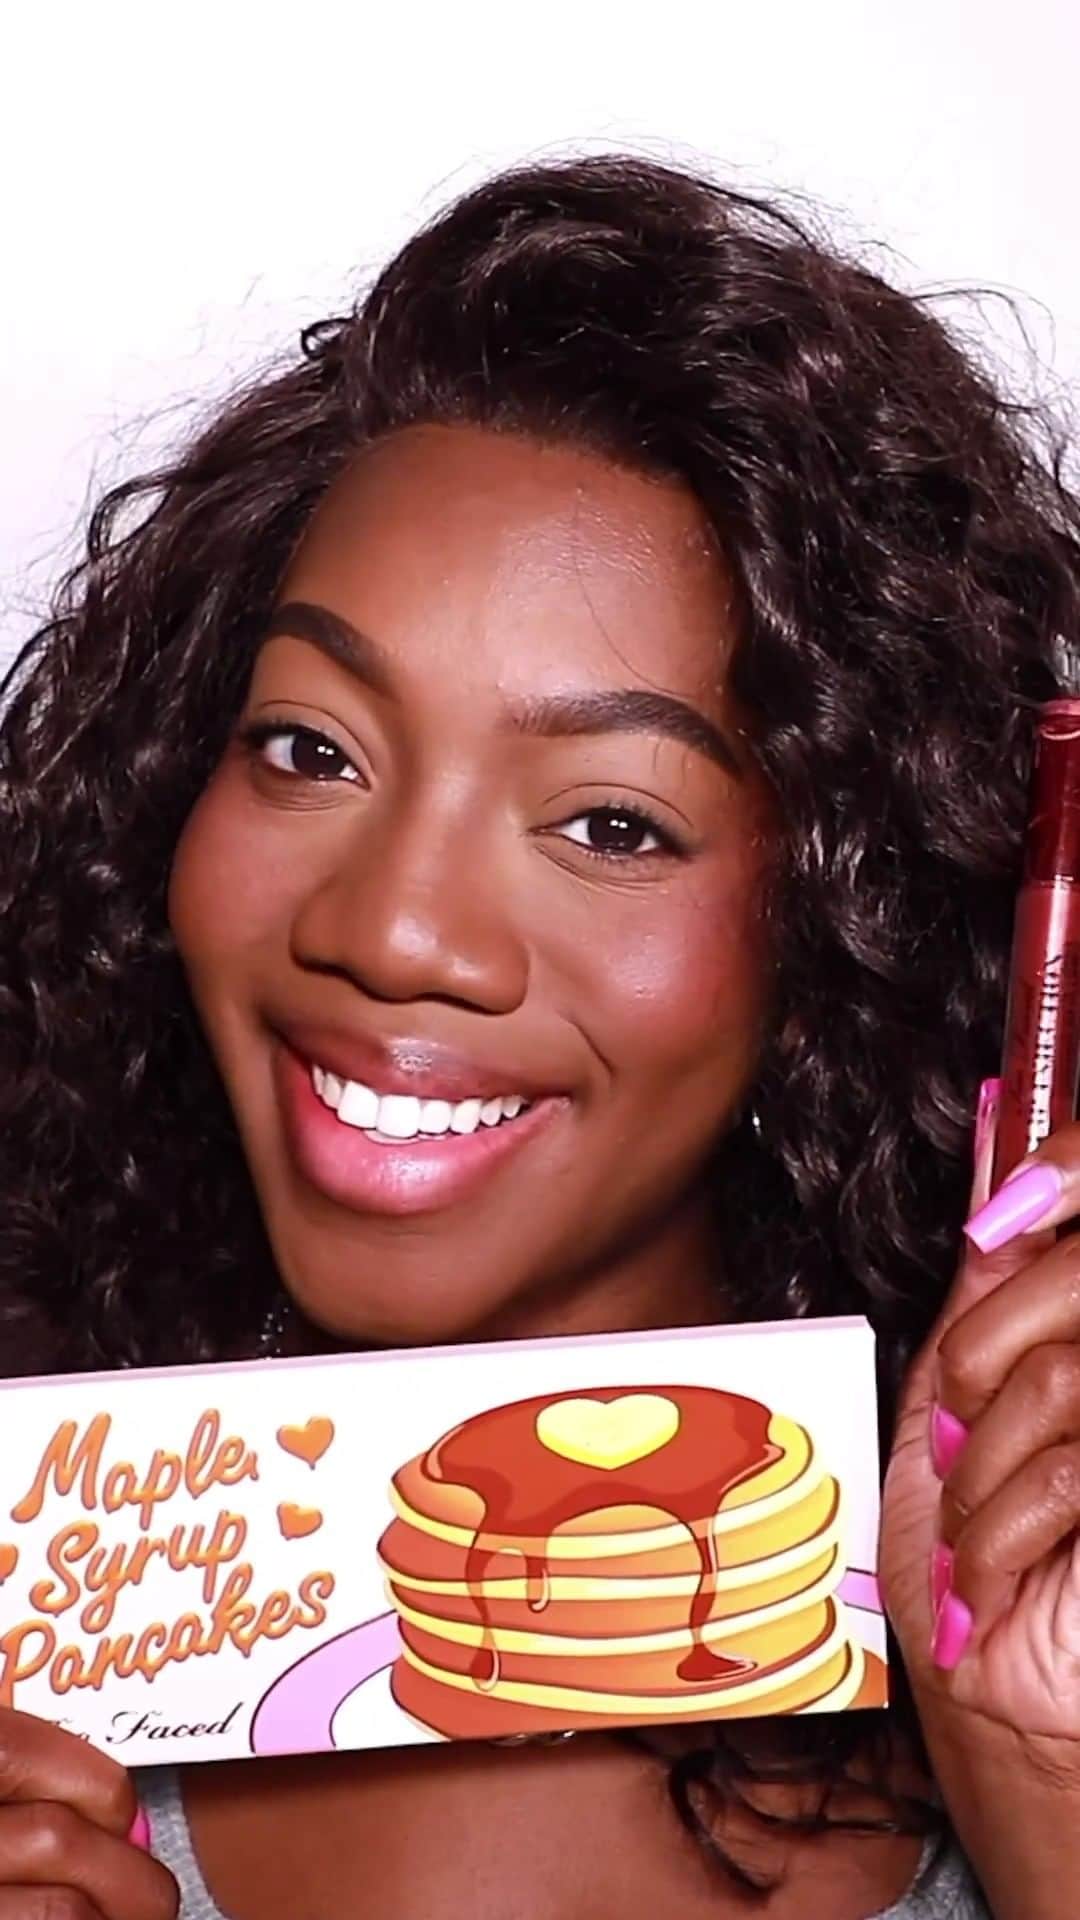 Too Facedのインスタグラム：「Get the ✨🥞 Maple Syrup Pancakes Look 🥞✨with @safai305 💖 She wears the shades Hazel-Nuts, Haute Cake, A La Mode, and Sleepin' In and tops off her look with our Lip Injection Maximum Plump shade Maple Syrup Pancakes! #regram #toofaced #tfcrueltyfree」